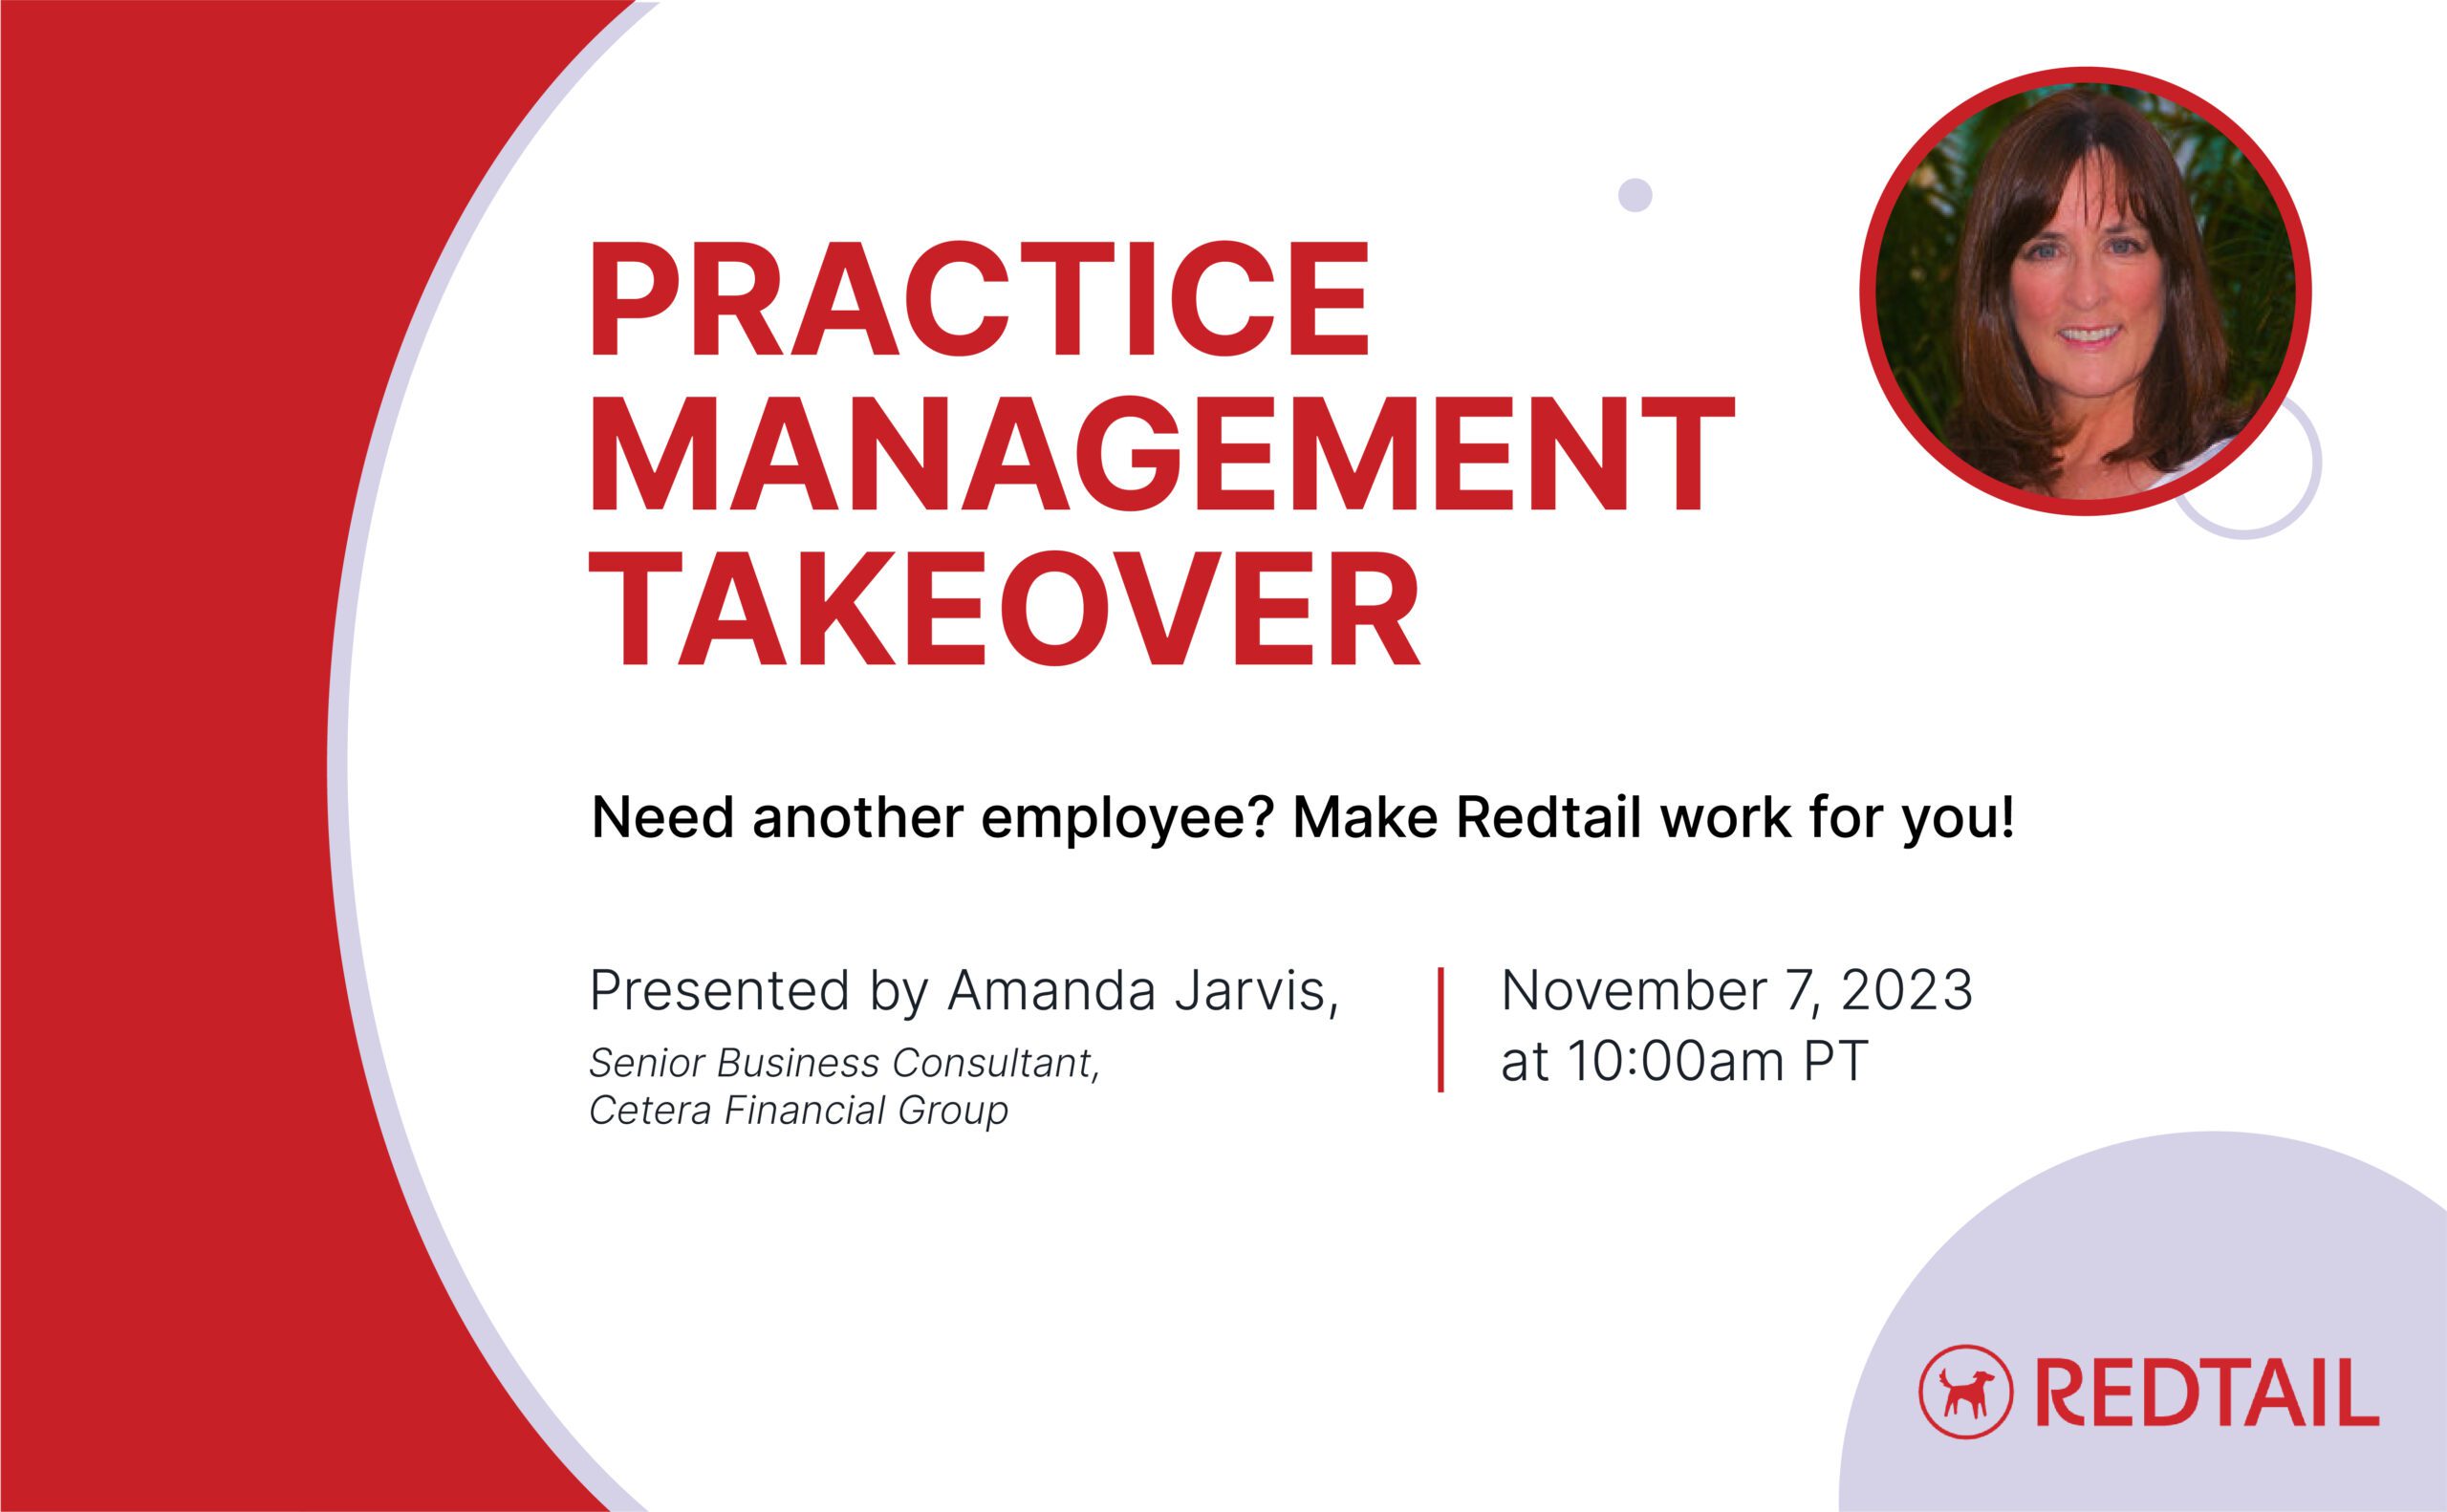 Practice Management Takeover webinar with Amanda Jarvis